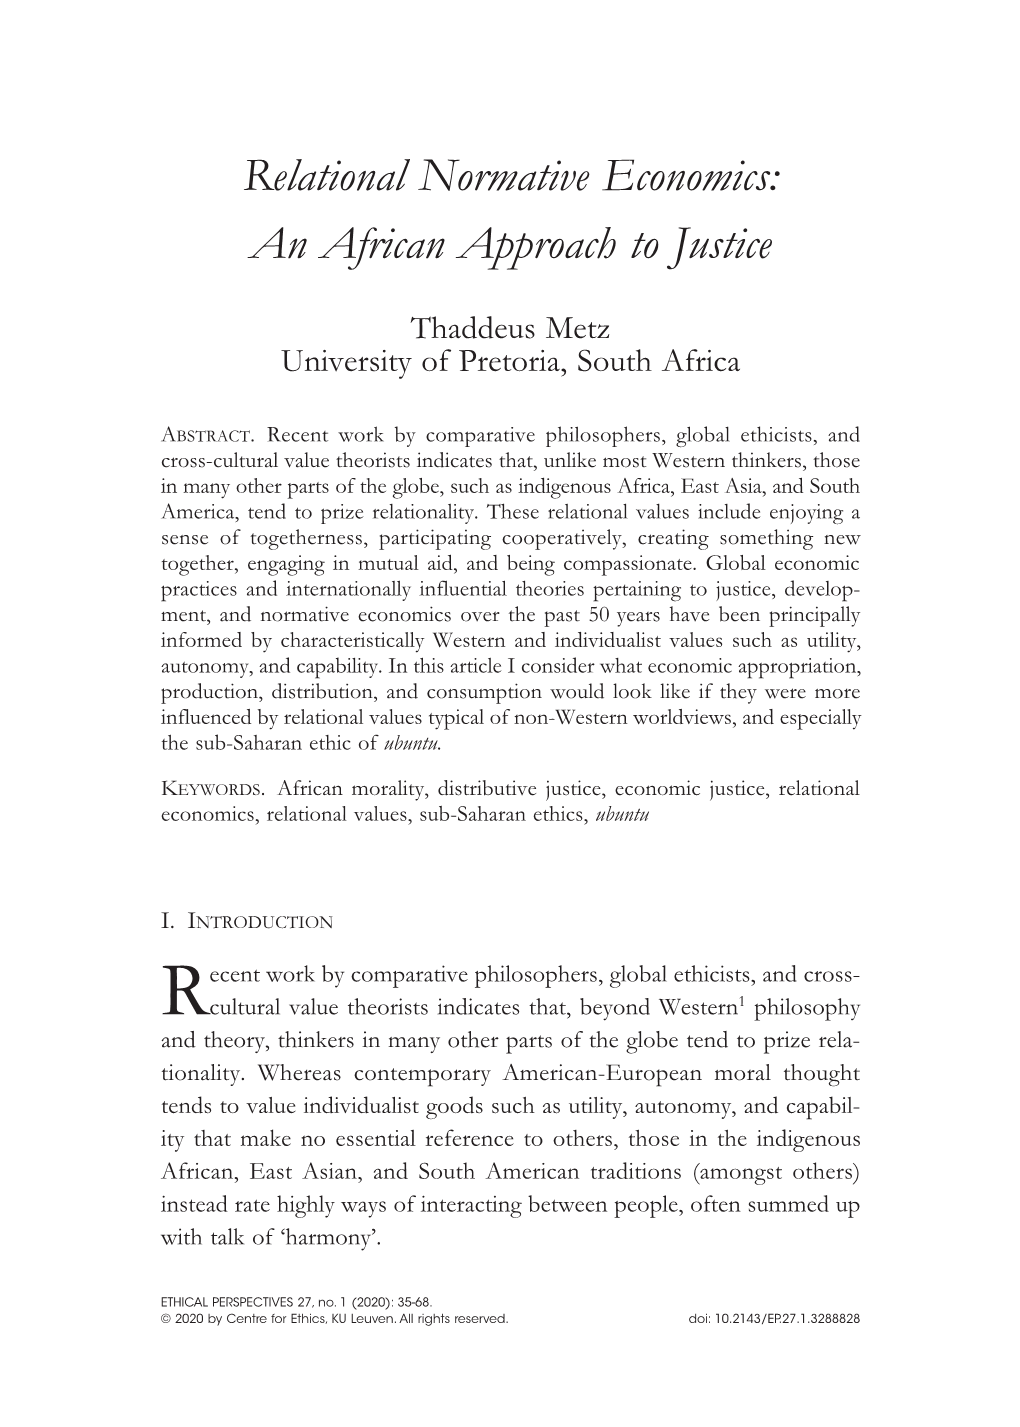 Relational Normative Economics: an African Approach to Justice